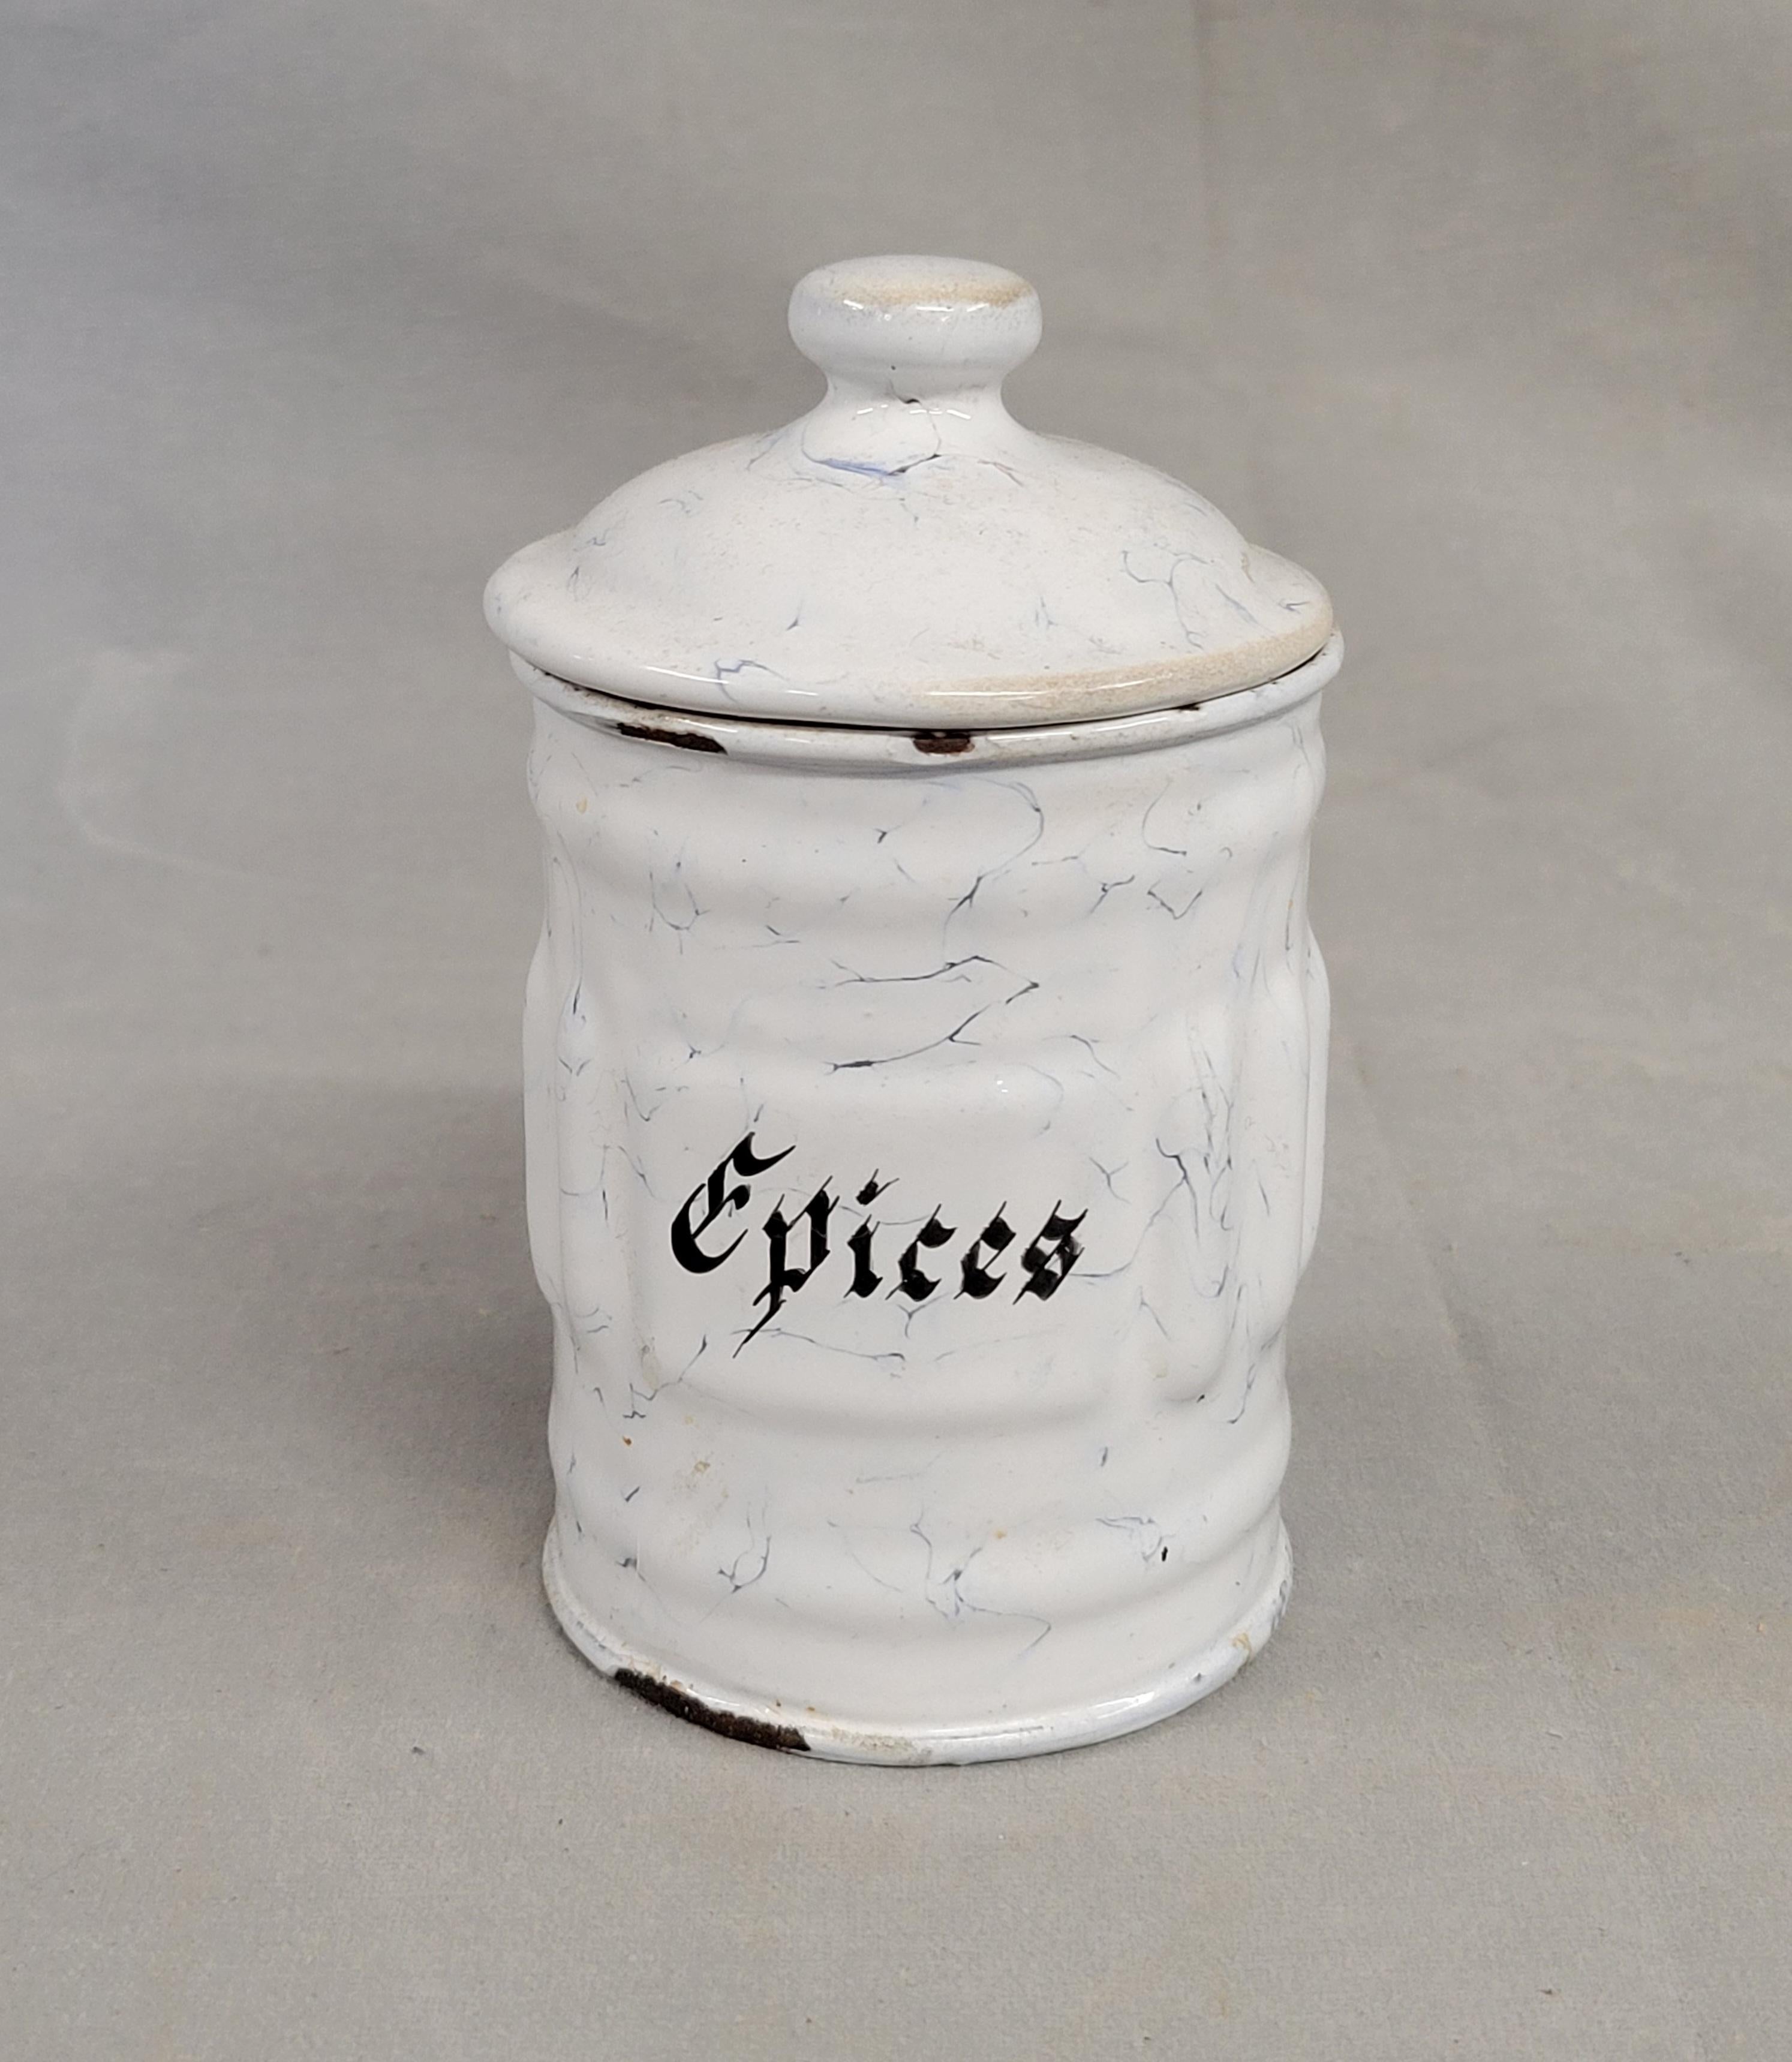 Antique French White and Blue Enamel Canister Set - 6 Pieces For Sale 2